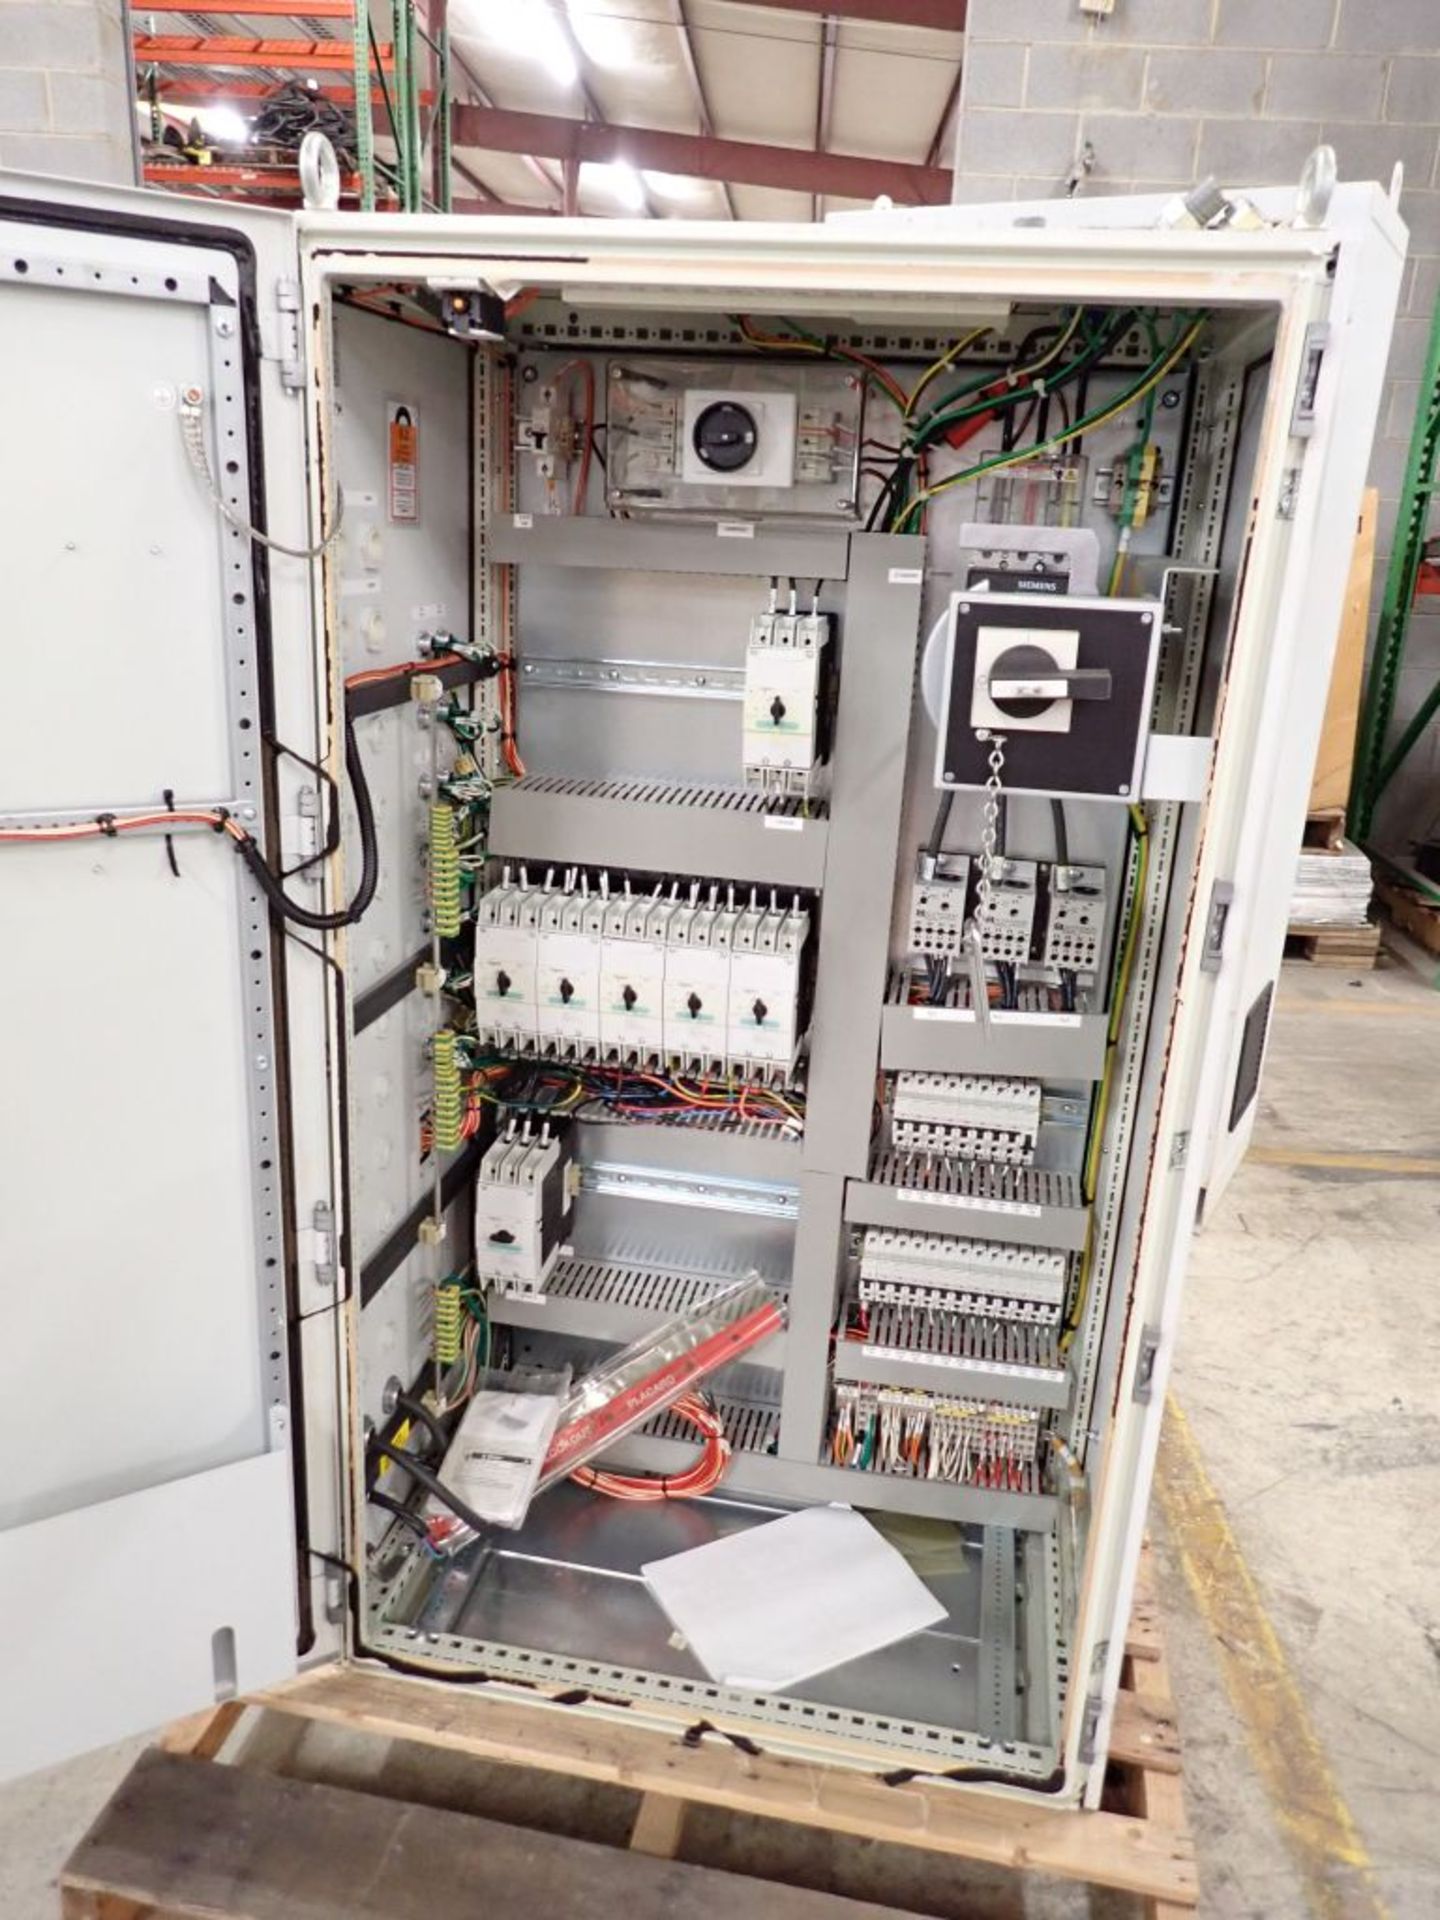 Control Panel with Contents - Image 18 of 26